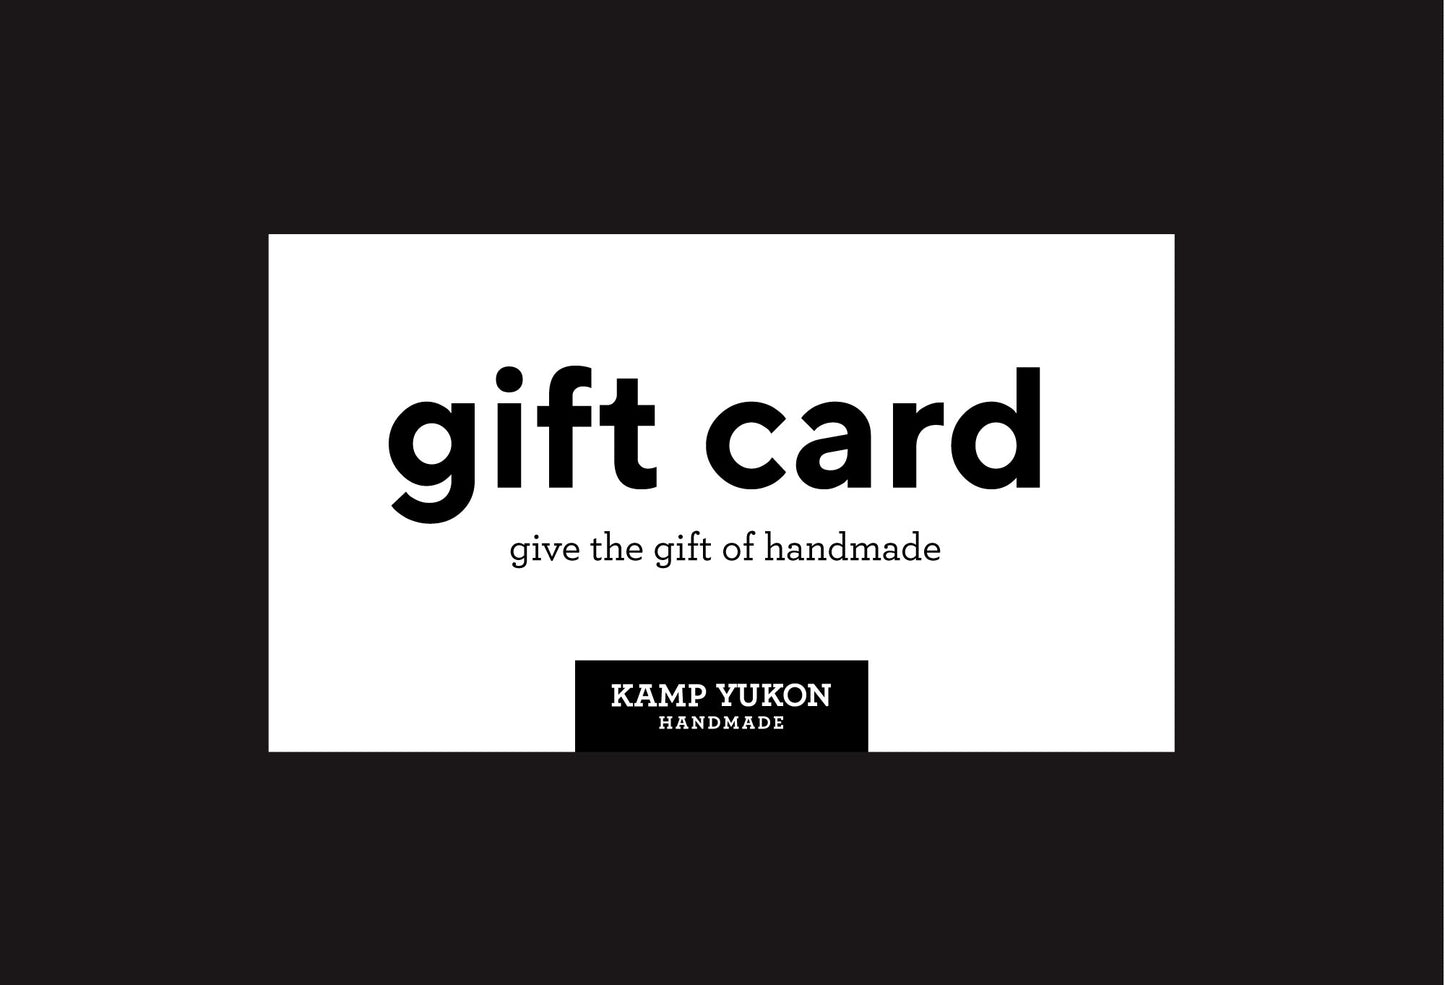 Gift card, that says "give the gift of handmade" 